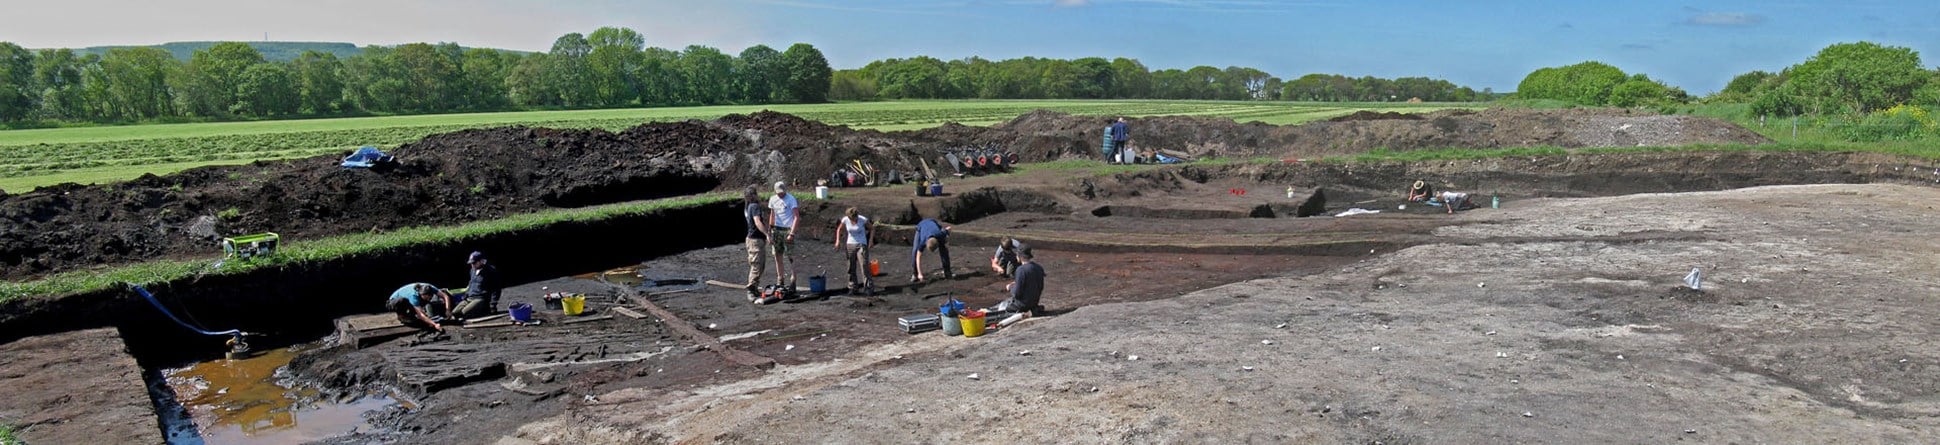 Colour photograph showing lots of archaeologists digging in a trench with spoilheaps behind; some timbers are visible left